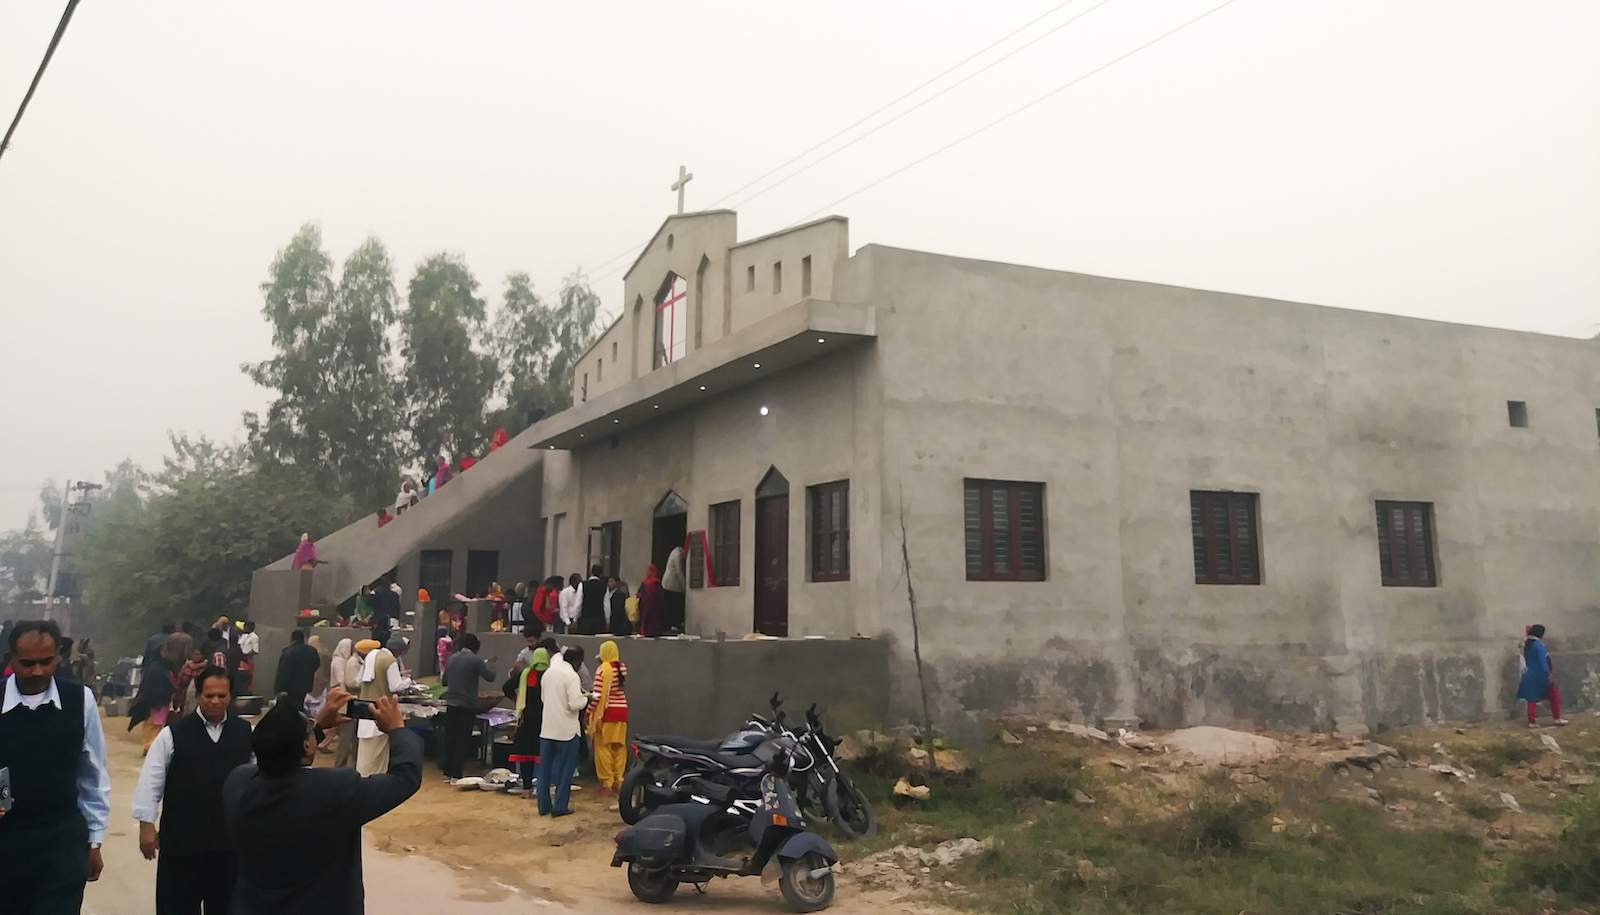 The new, enlarged church building reflects the dramatic growth that took place in less than two years in spite of Pastor Charanjit’s brutal persecution.